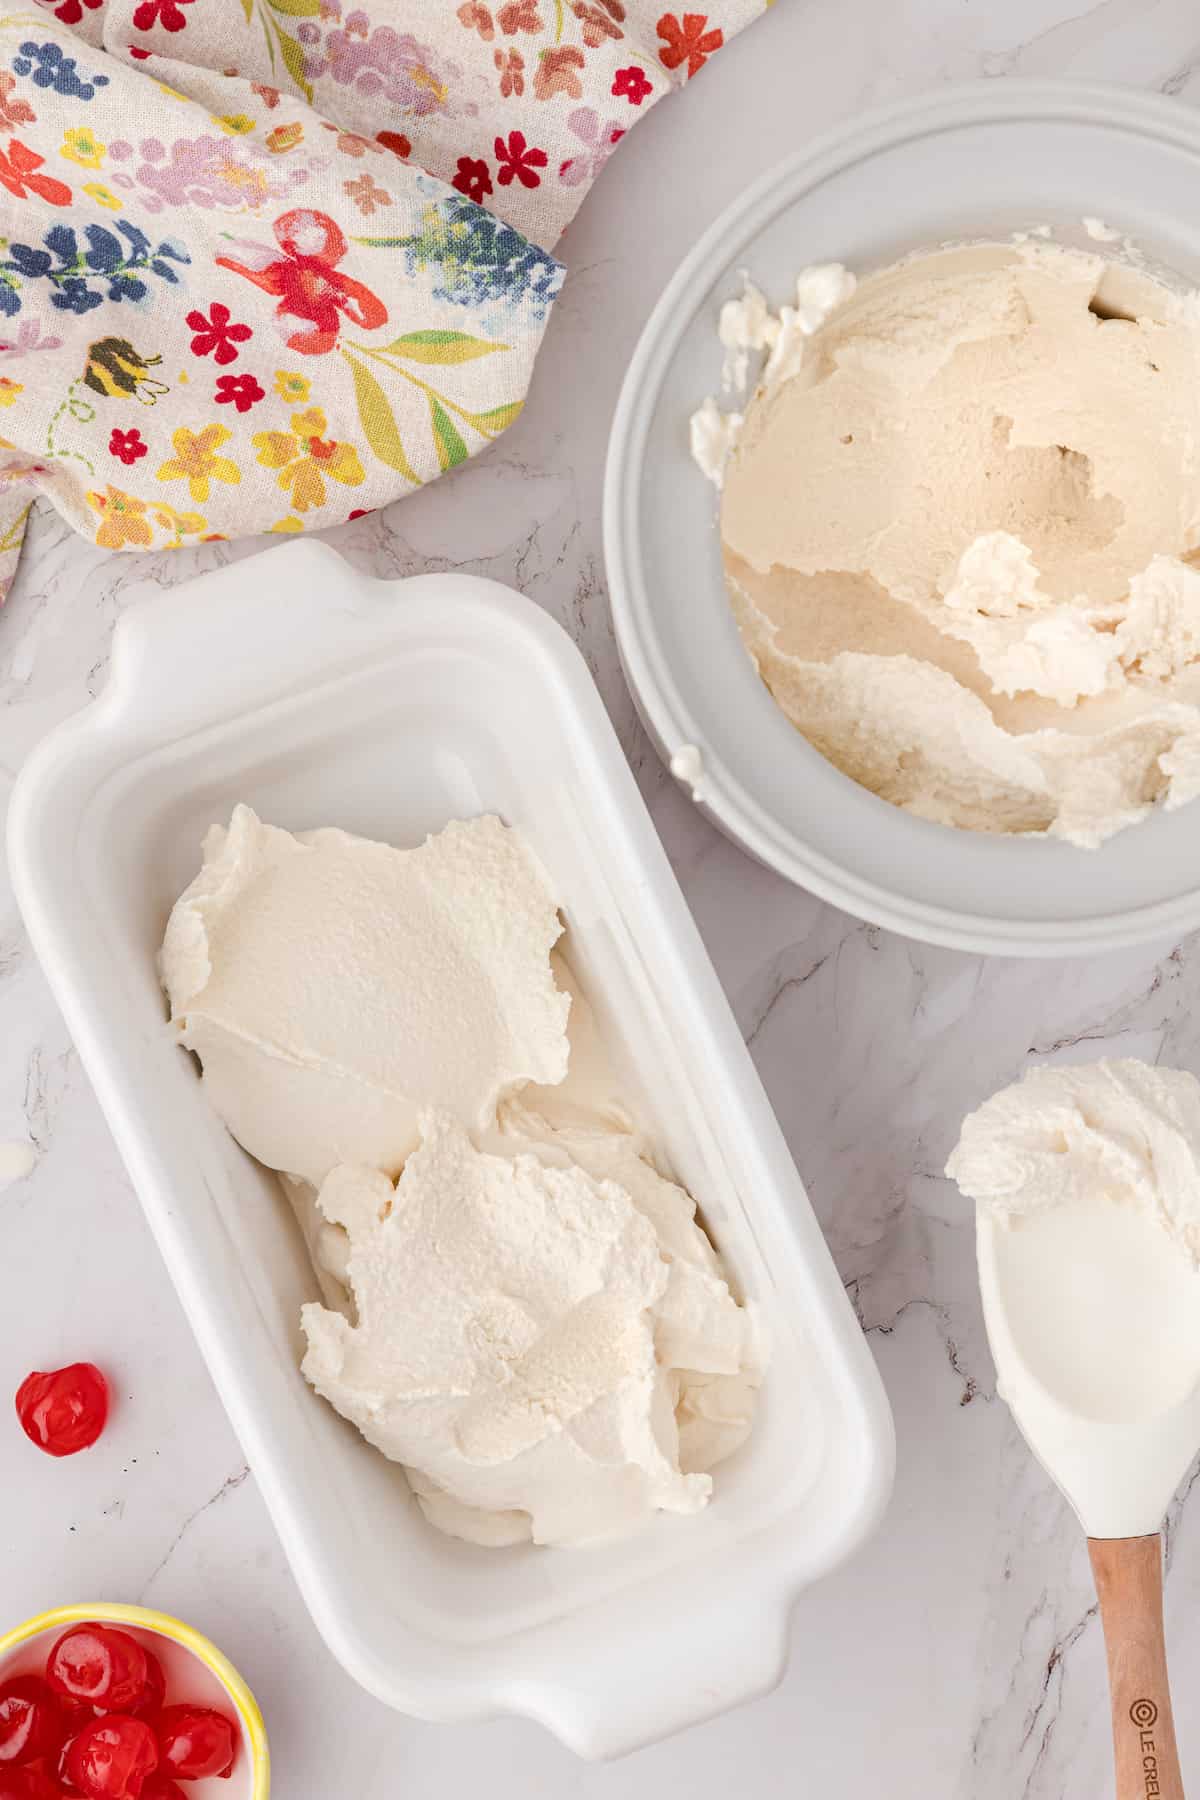 spoon the soft ice cream into a shallow pan